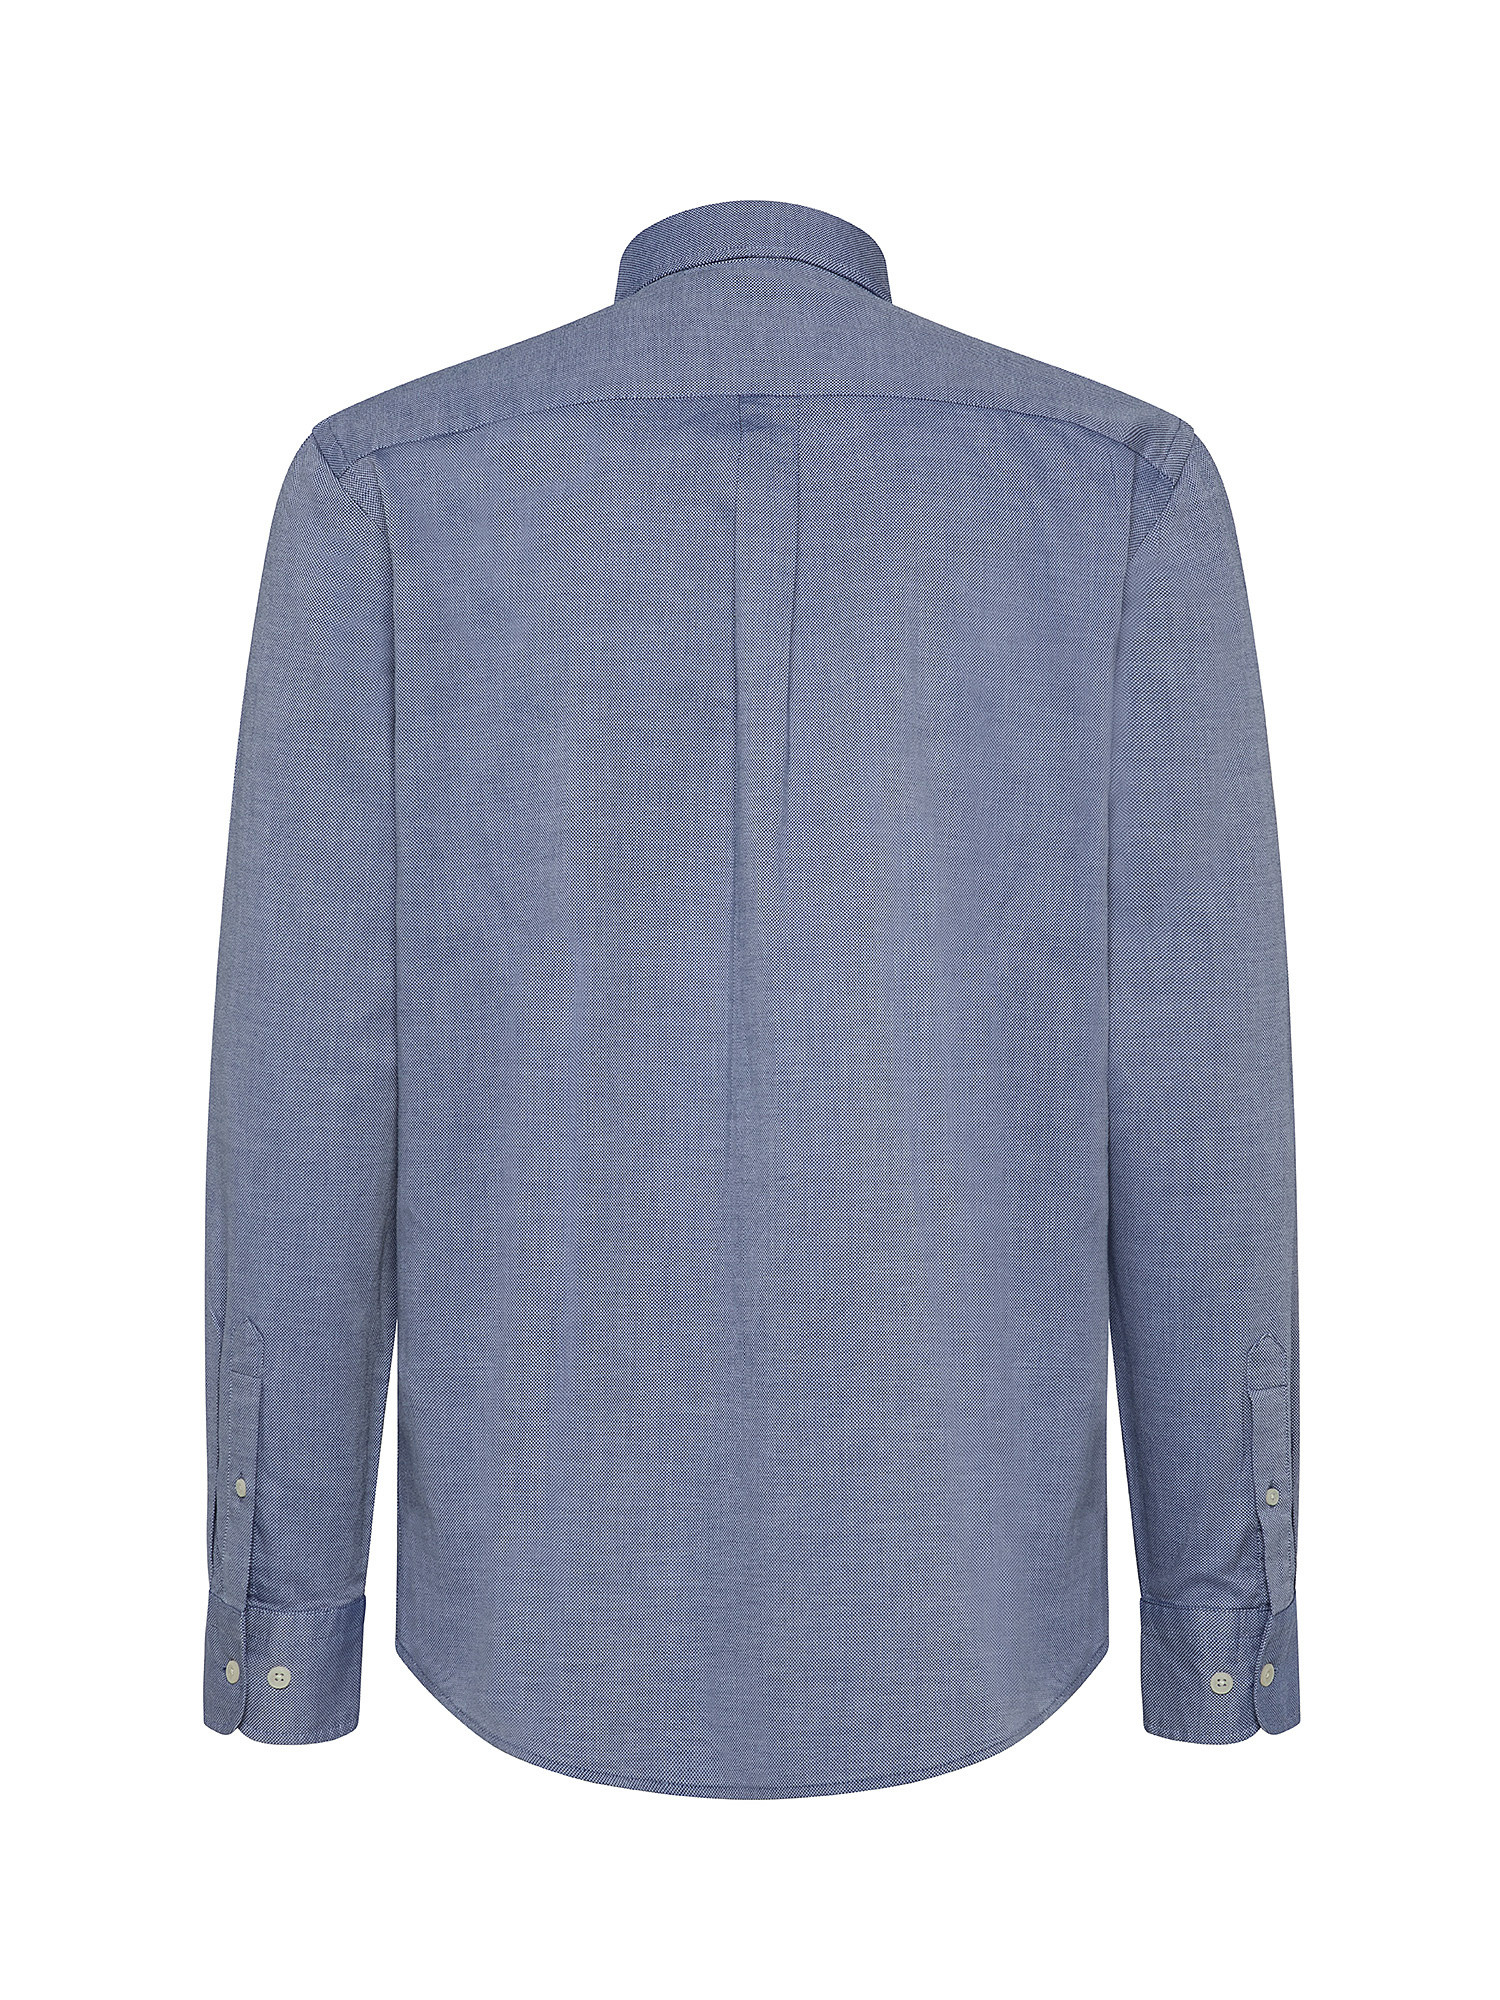 Oxford fabric shirt, Blue, large image number 1